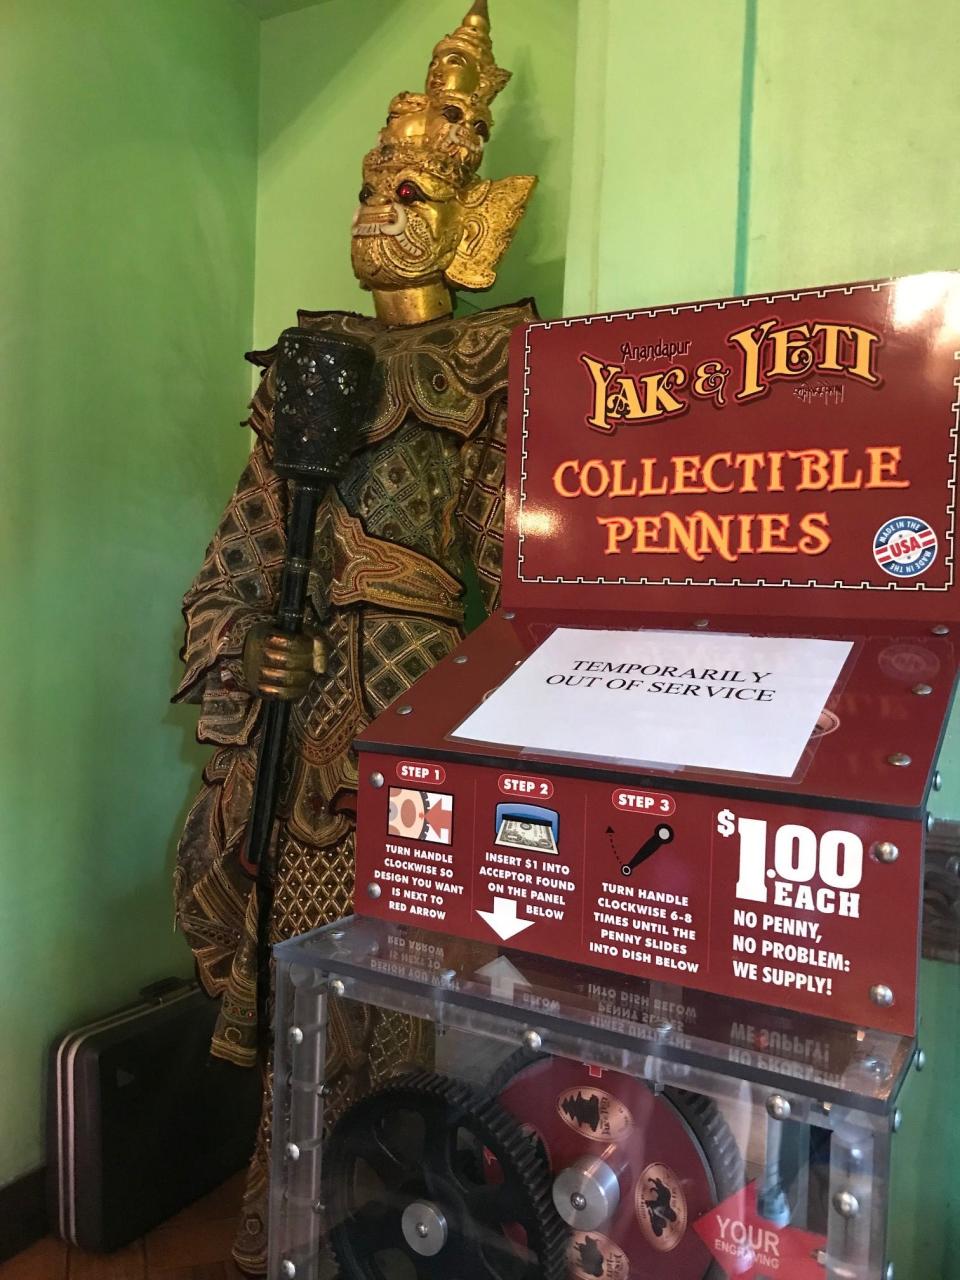 Collectible penny machines which press the coins can provide an inexpensive souvenir and are located across Walt Disney World parks, water parks, hotels and Disney Springs.